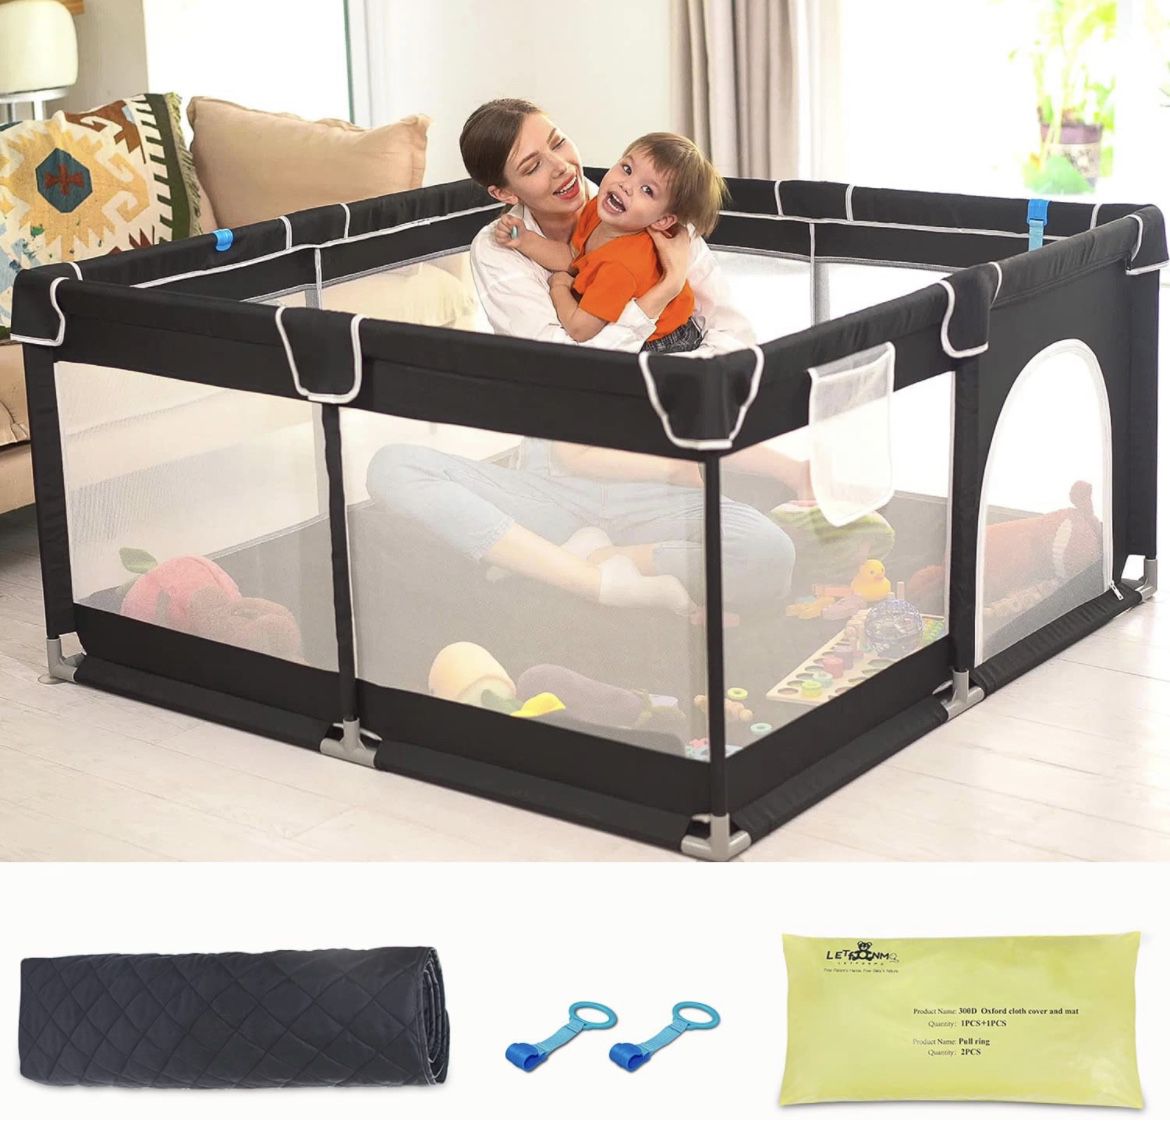 Baby Playpen with Mat, Letfonmo Play Pens for Babies and Toddlers, Baby Play Yards No Gaps, Playpen with Gate, Indoor & Outdoor Kids Activity Center, 